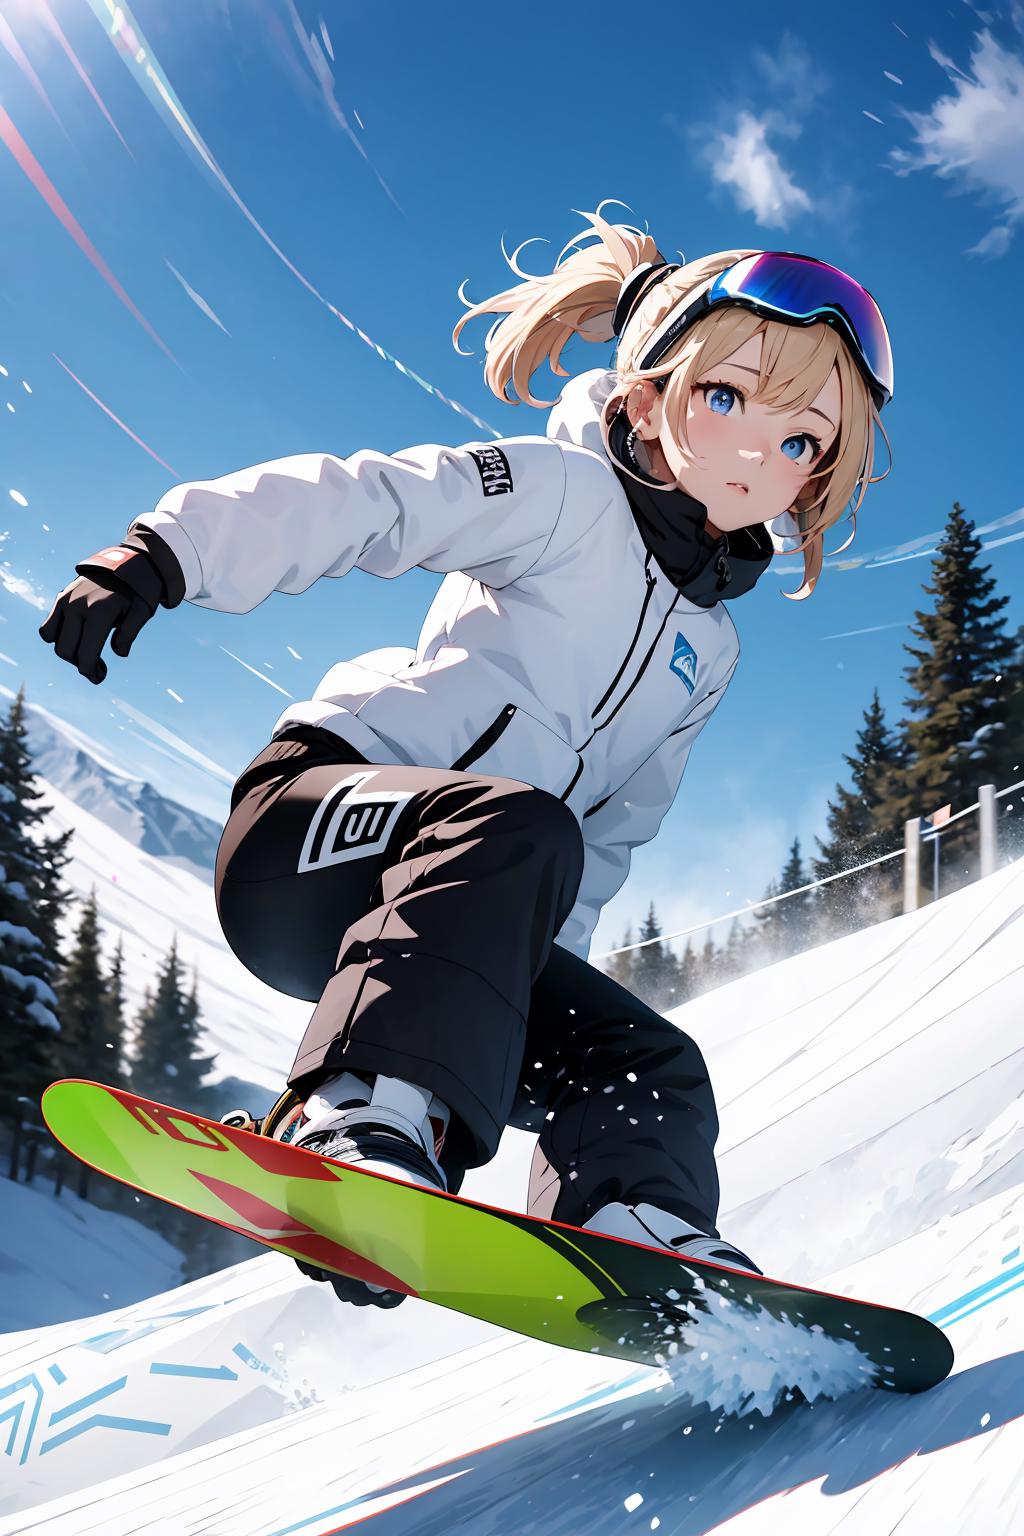 KREA - Search results for anime snowboarding